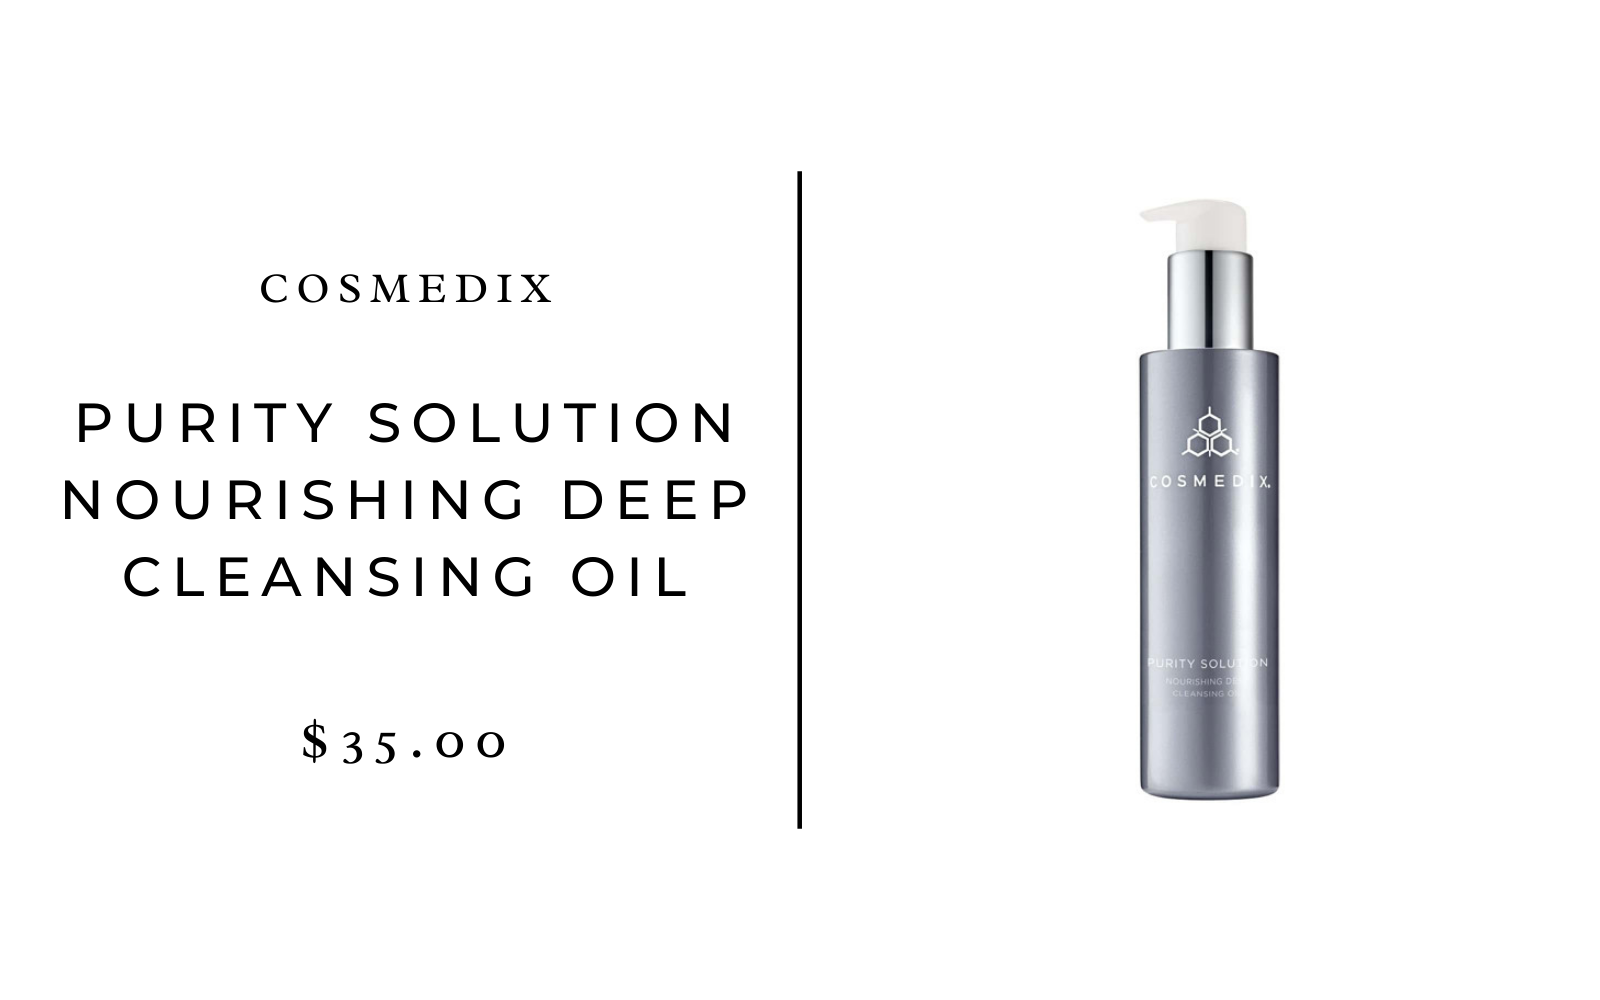 Cosmedix Purity Solution Cleansing Oil